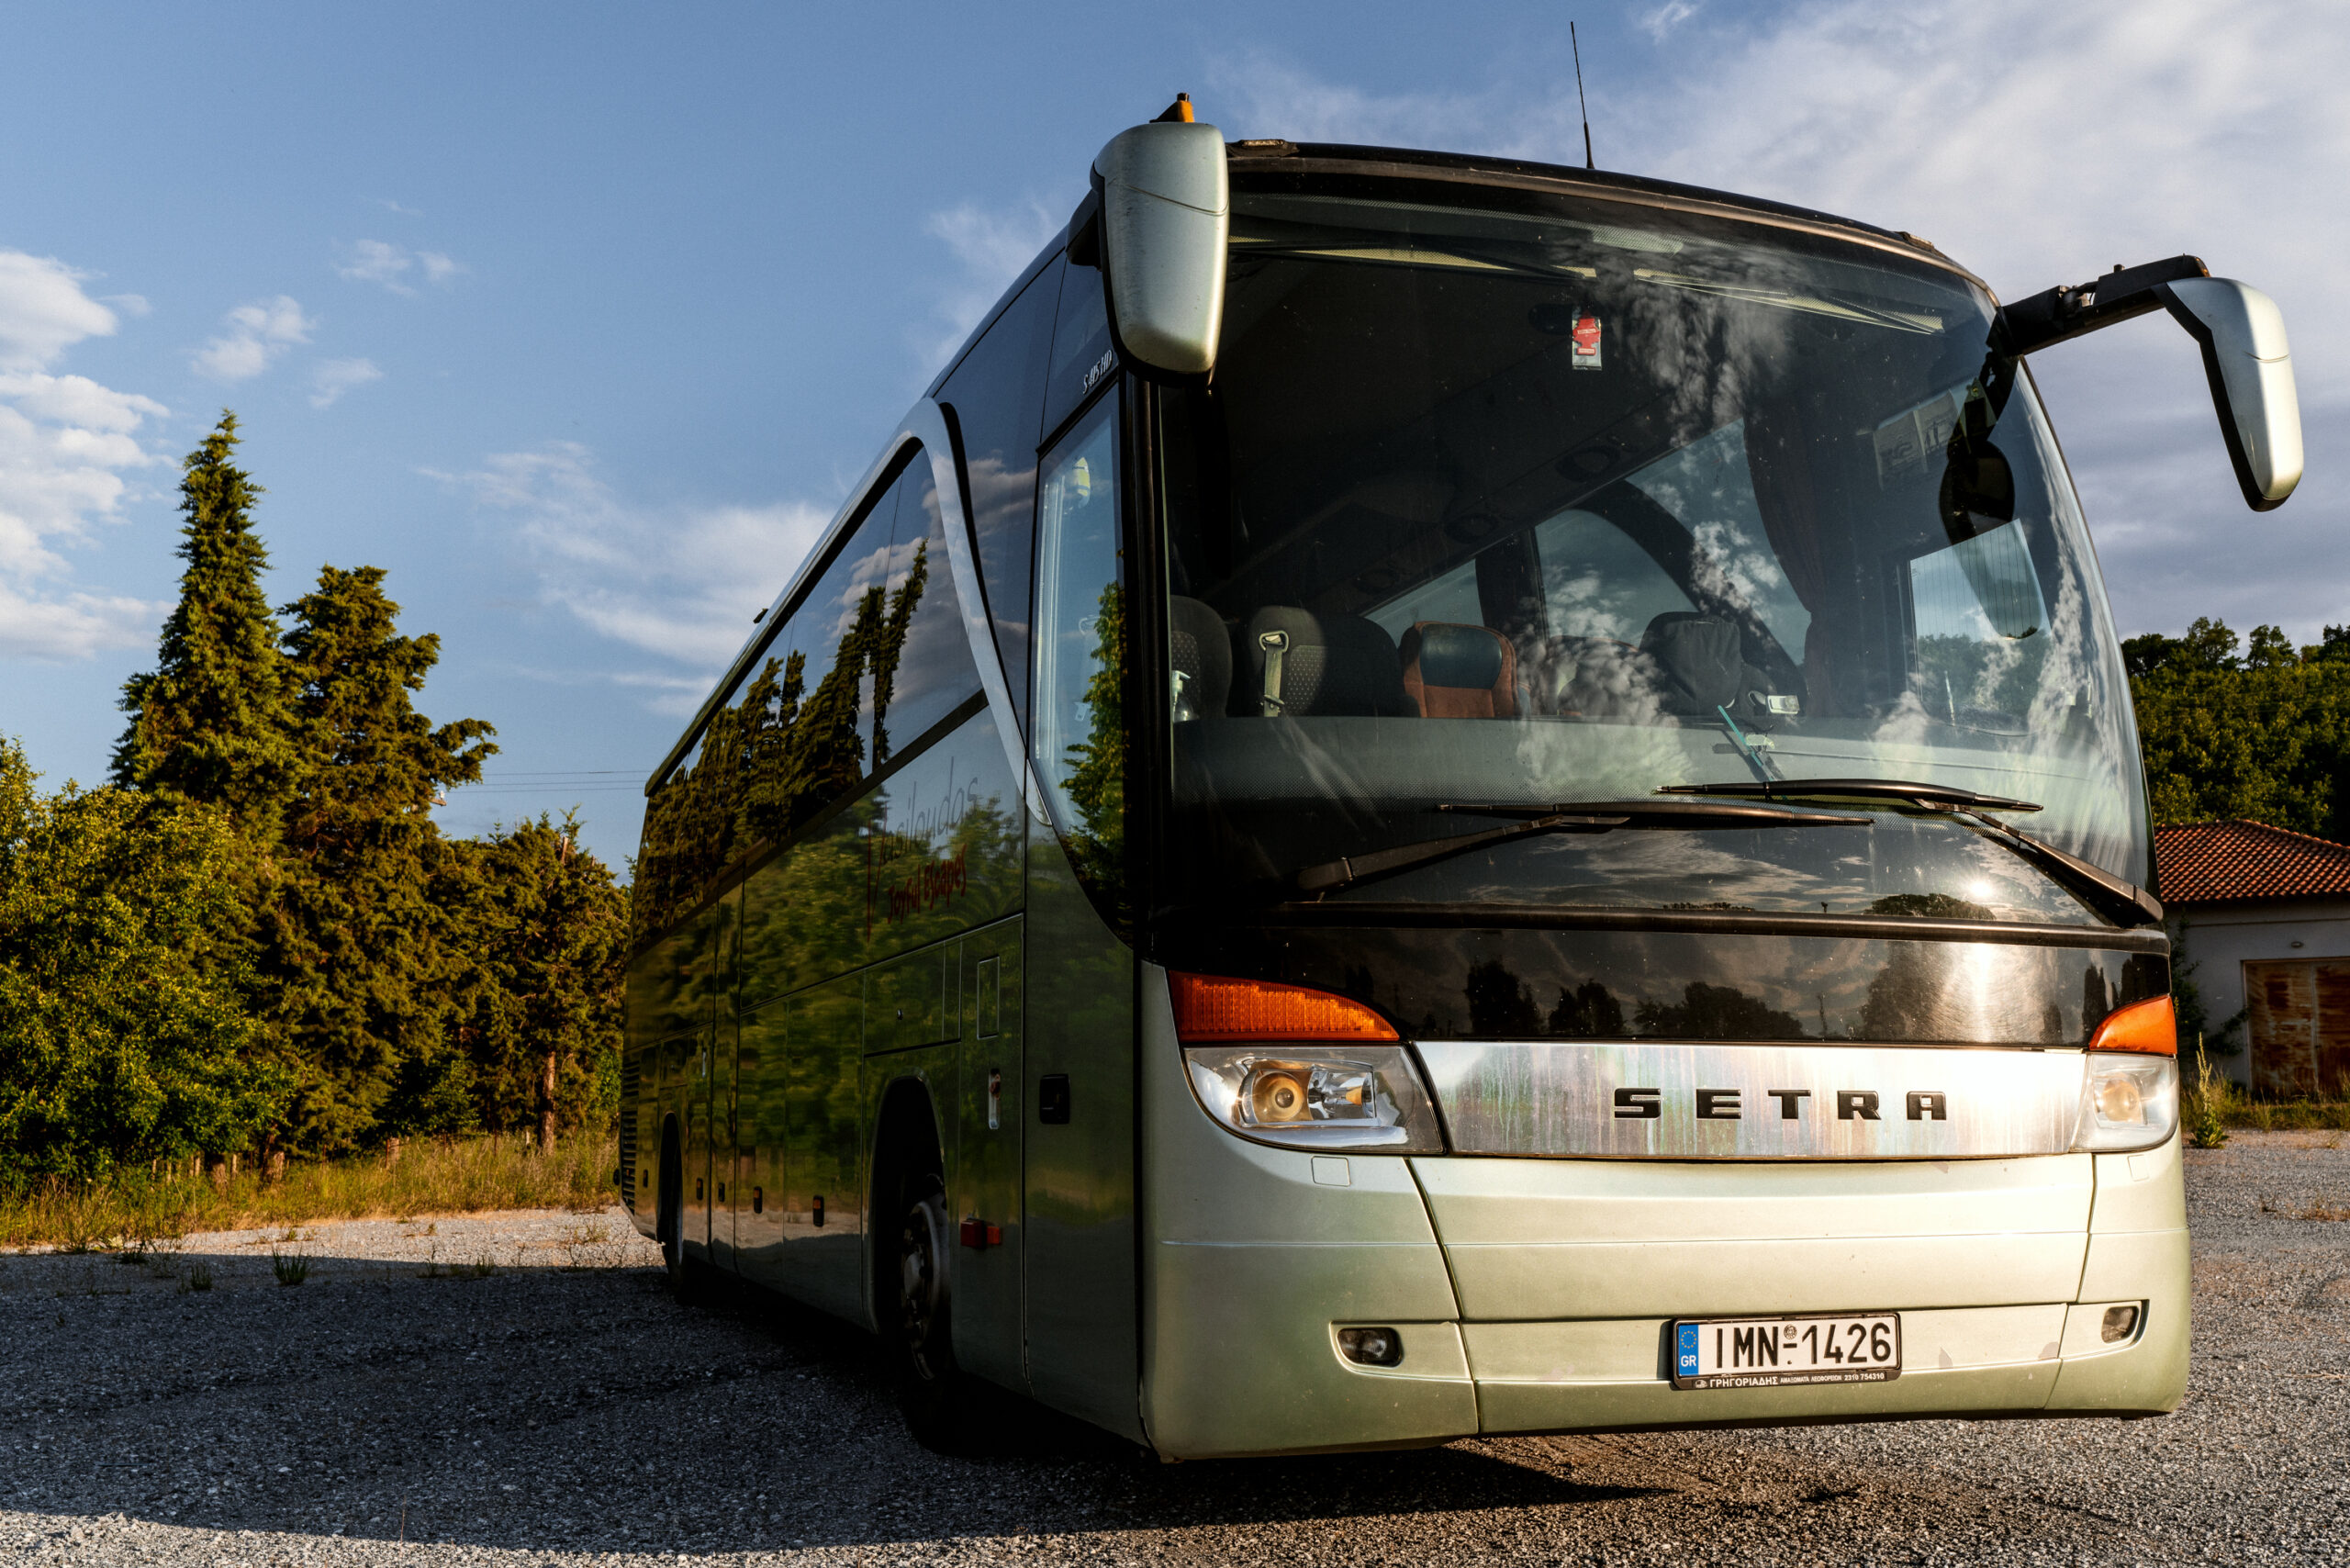 Bus Setra front view